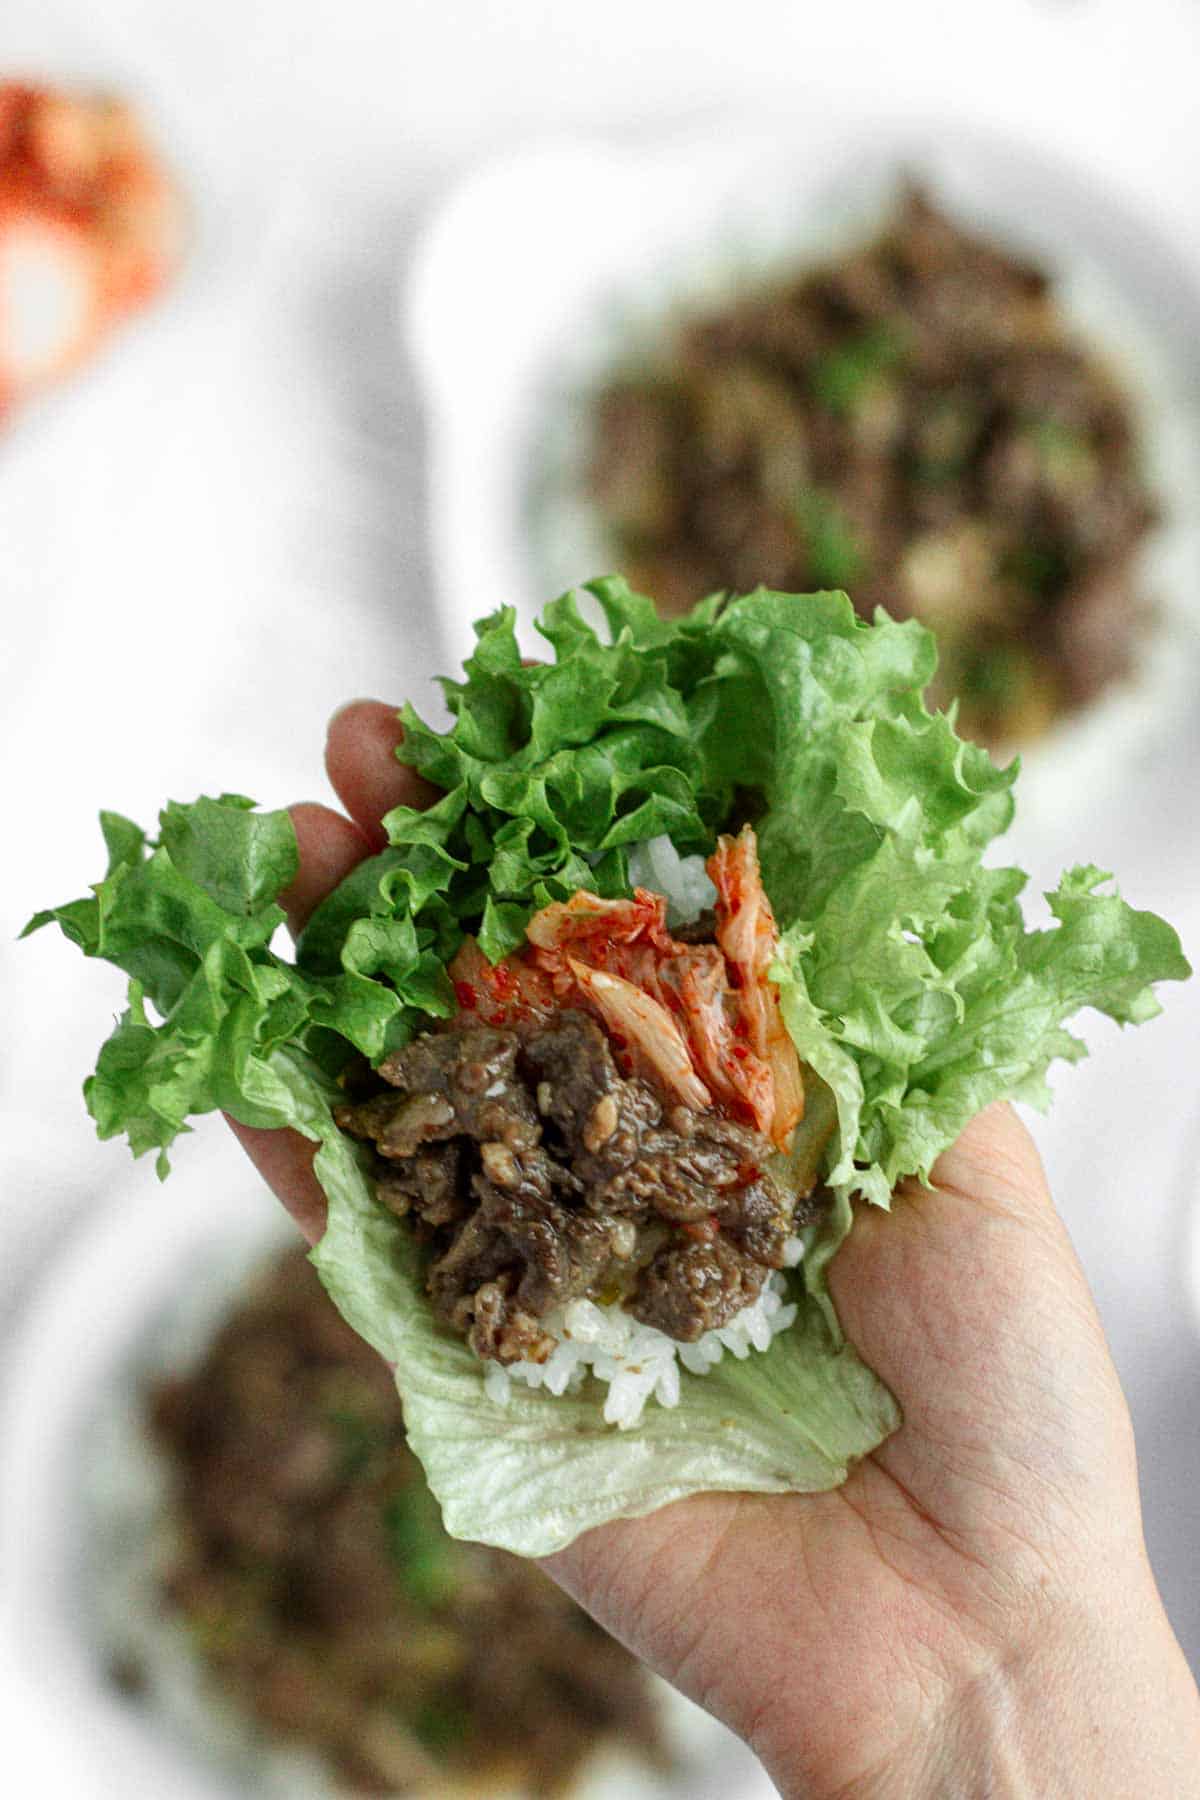 Korean Beef bulgogi featuring a very thinly sliced and tender beef marinated in sweet and savoury sauce.